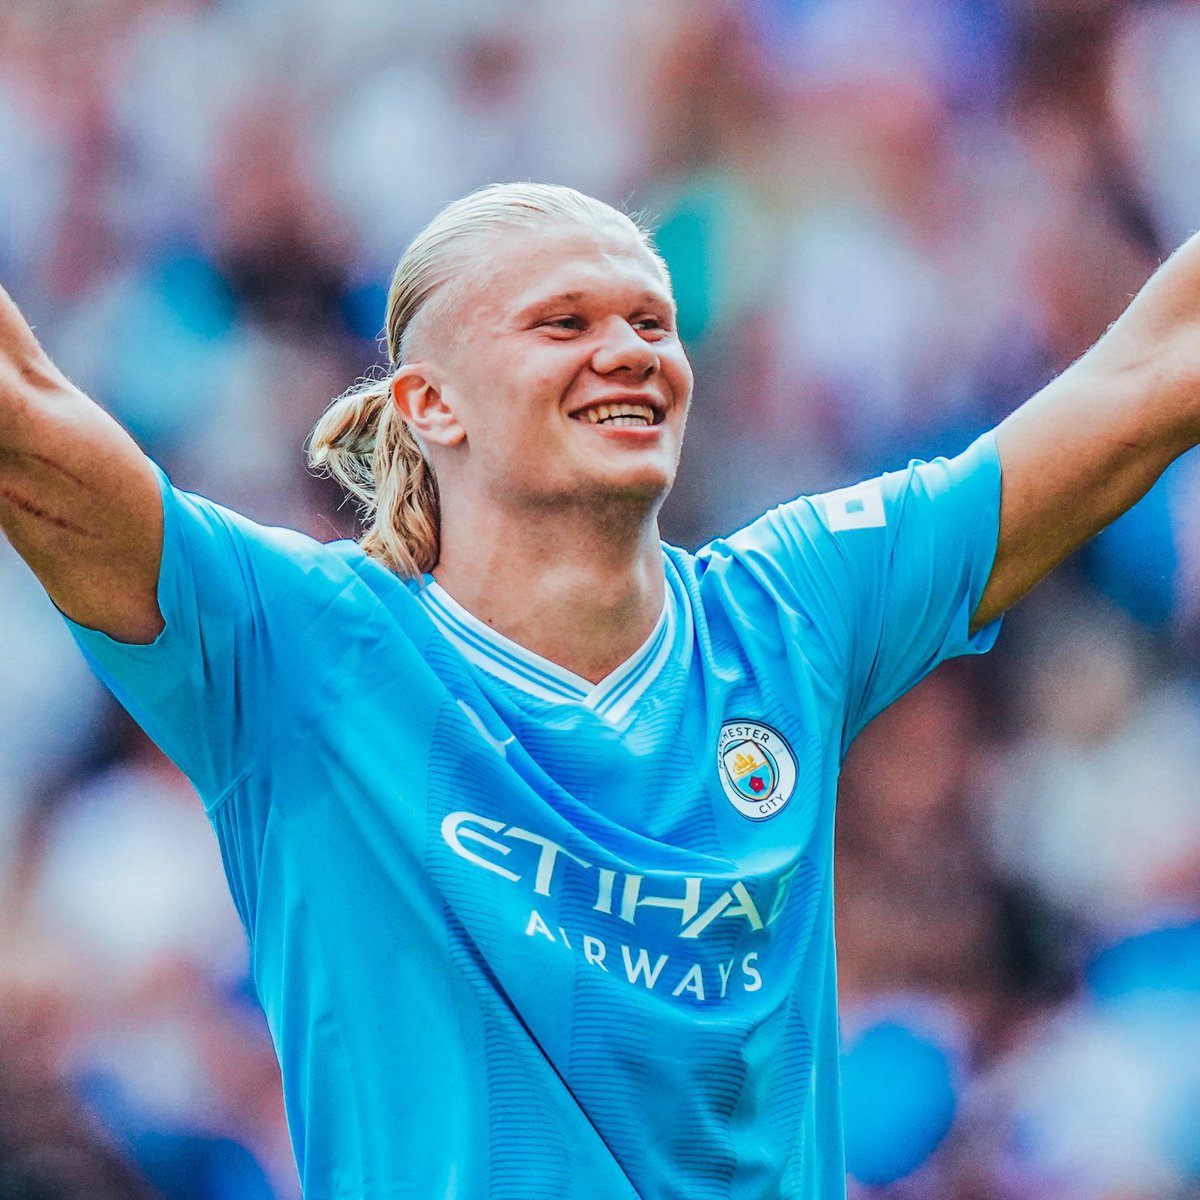 🚨 𝗚𝗜𝗩𝗘𝗔𝗪𝗔𝗬: If Erling Haaland scores 𝗙𝗜𝗥𝗦𝗧 against Everton today, we’ll giveaway a brand new Premier League shirt of your choice. 🔥 𝗧𝗼 𝗲𝗻𝘁𝗲𝗿: 1⃣ 𝗥𝗧 this tweet. 2⃣ 𝗙𝗼𝗹𝗹𝗼𝘄 this account Winner announced after the game, good luck! 👊